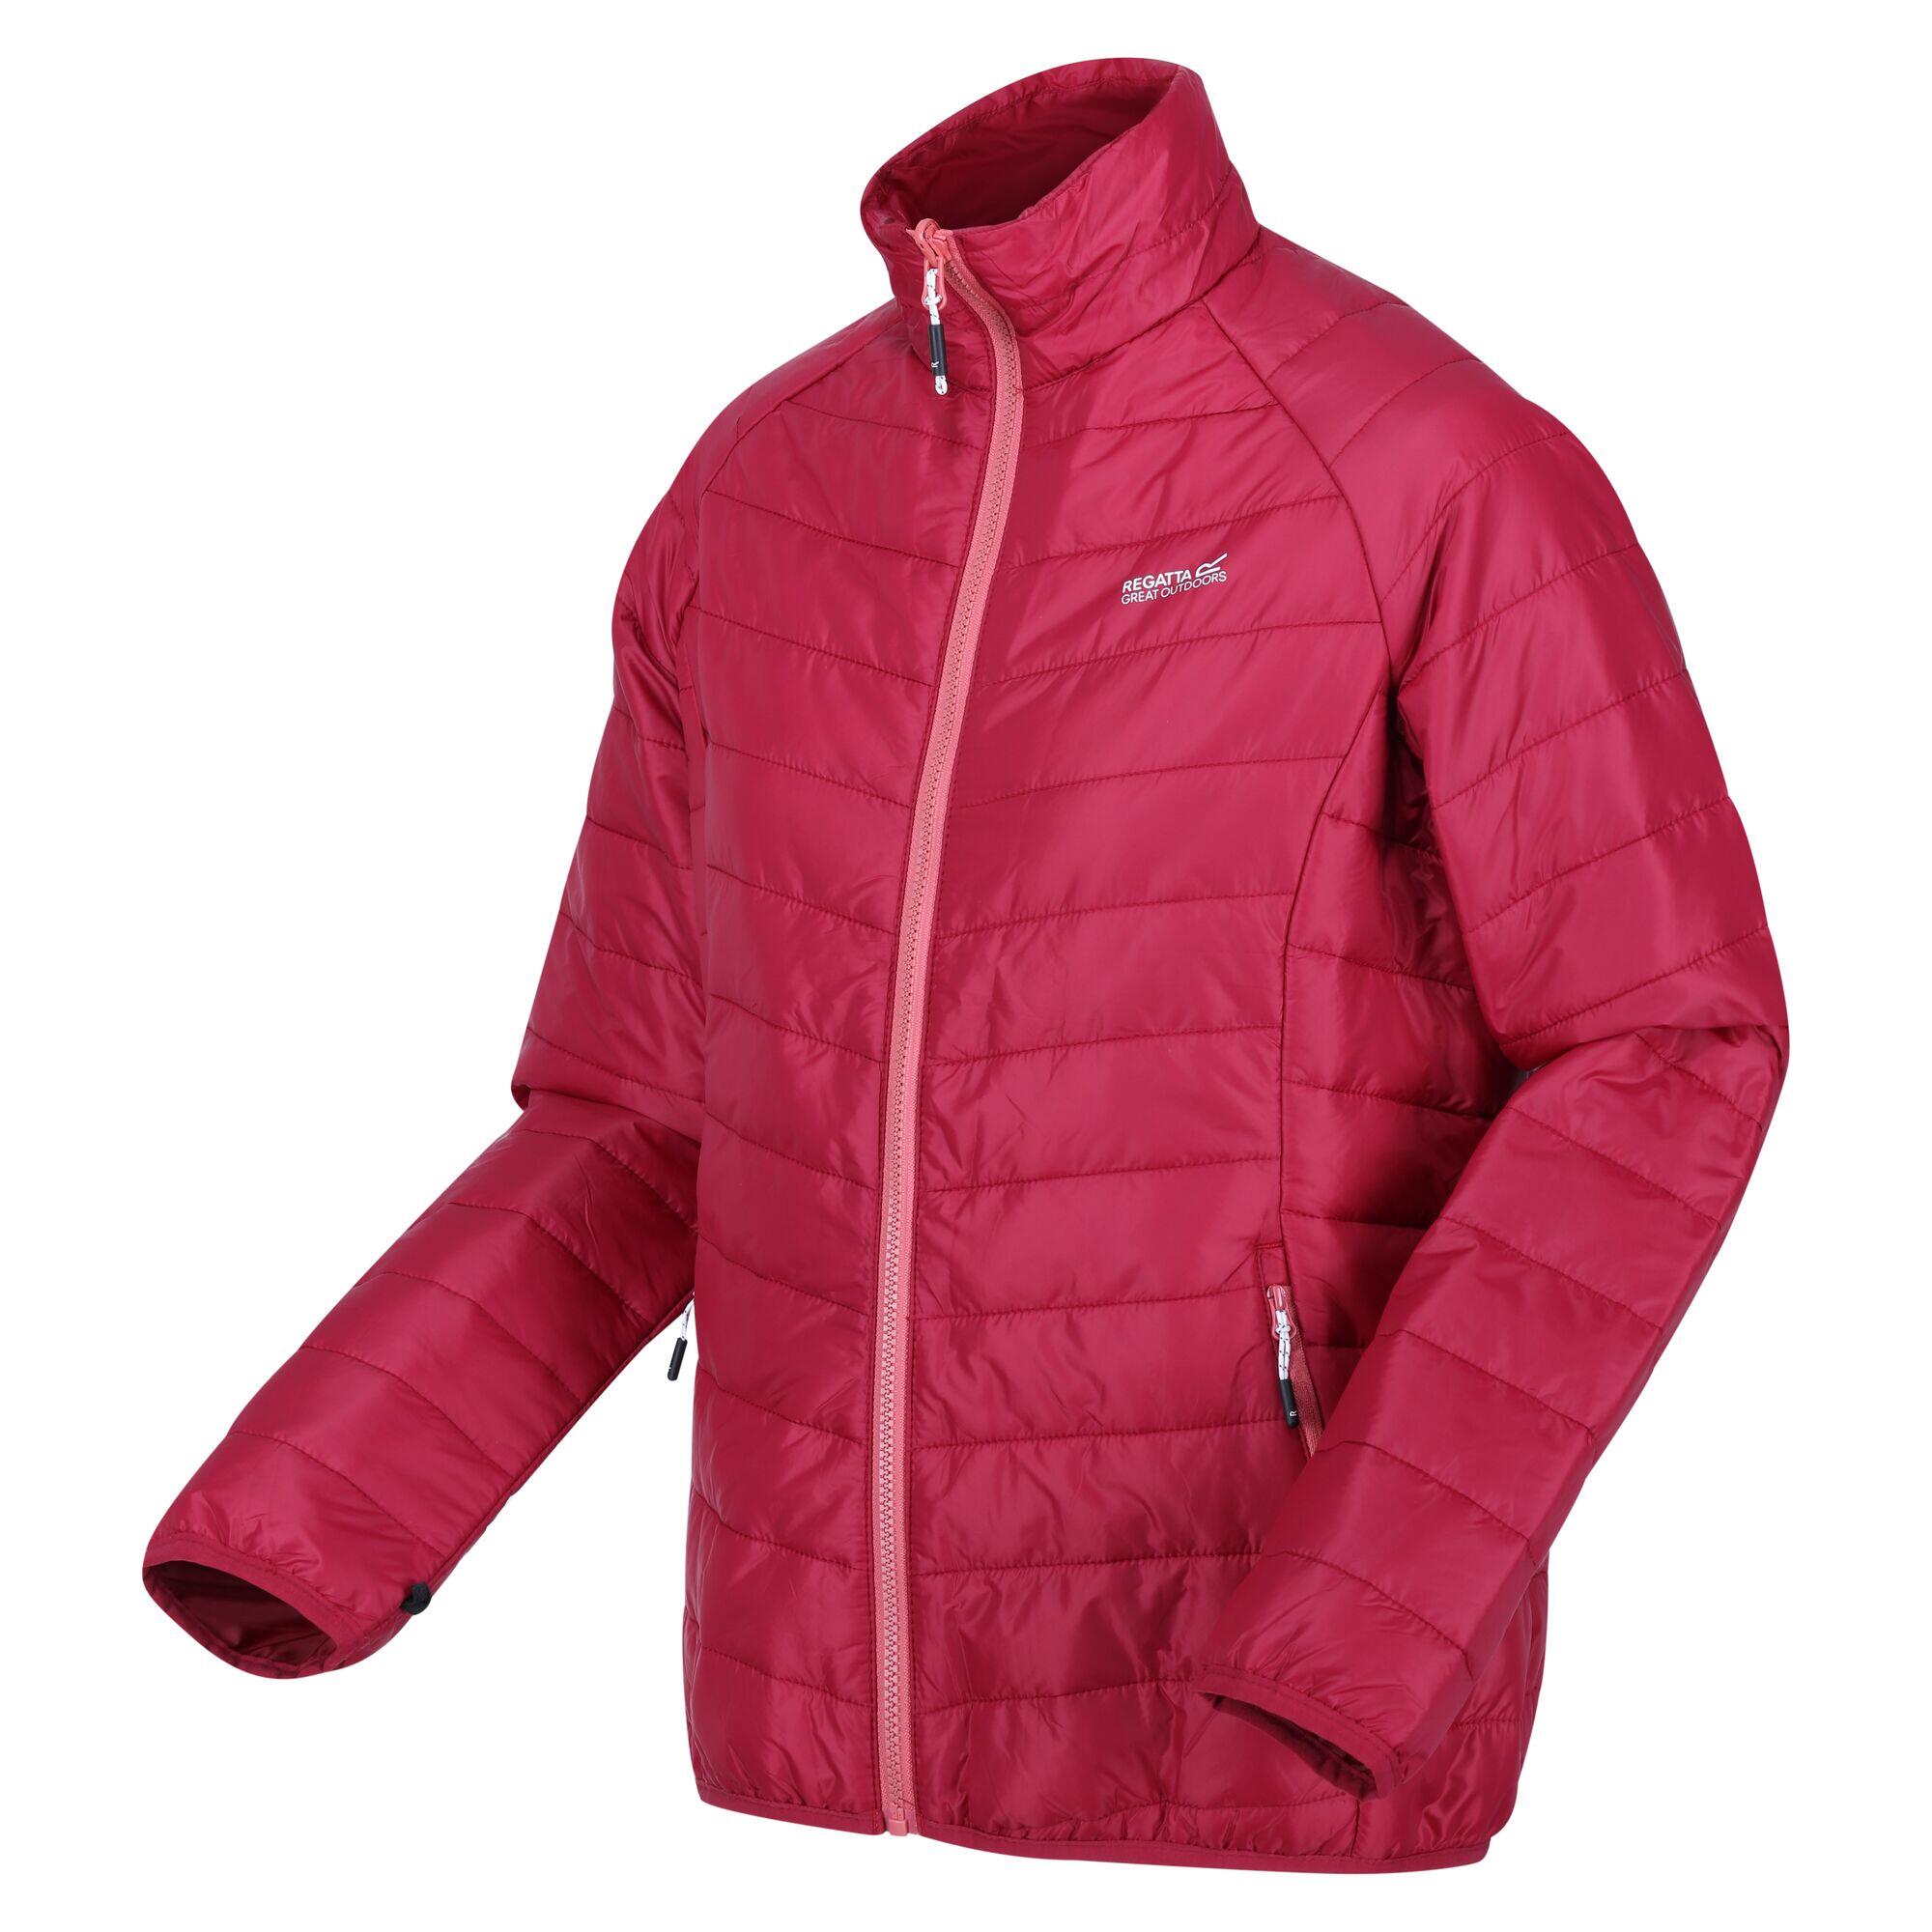 Womens/Ladies Wentwood VIII 2 in 1 Jacket (Mineral Red/Rumba Red) 4/5